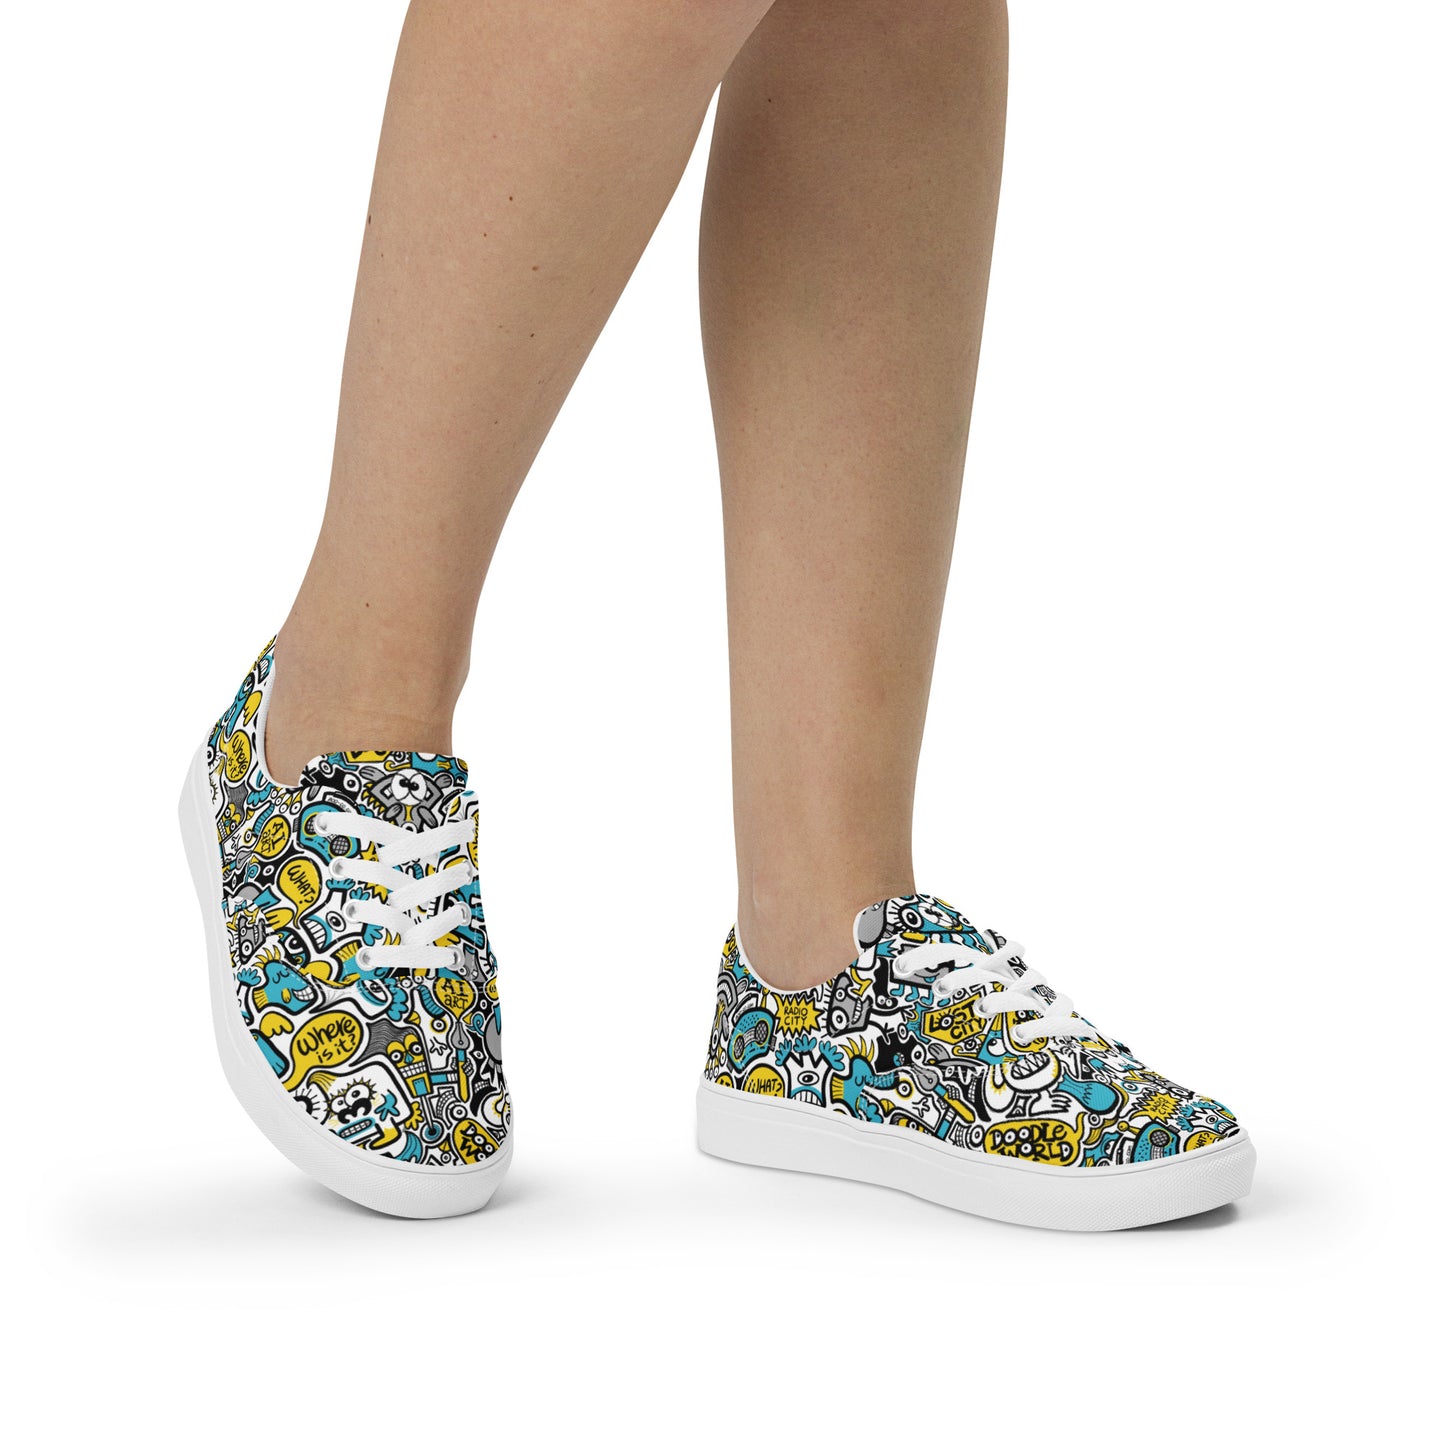 Discover a whole Doodle world buzzing in Lost city Women’s lace-up canvas shoes. Lifestyle